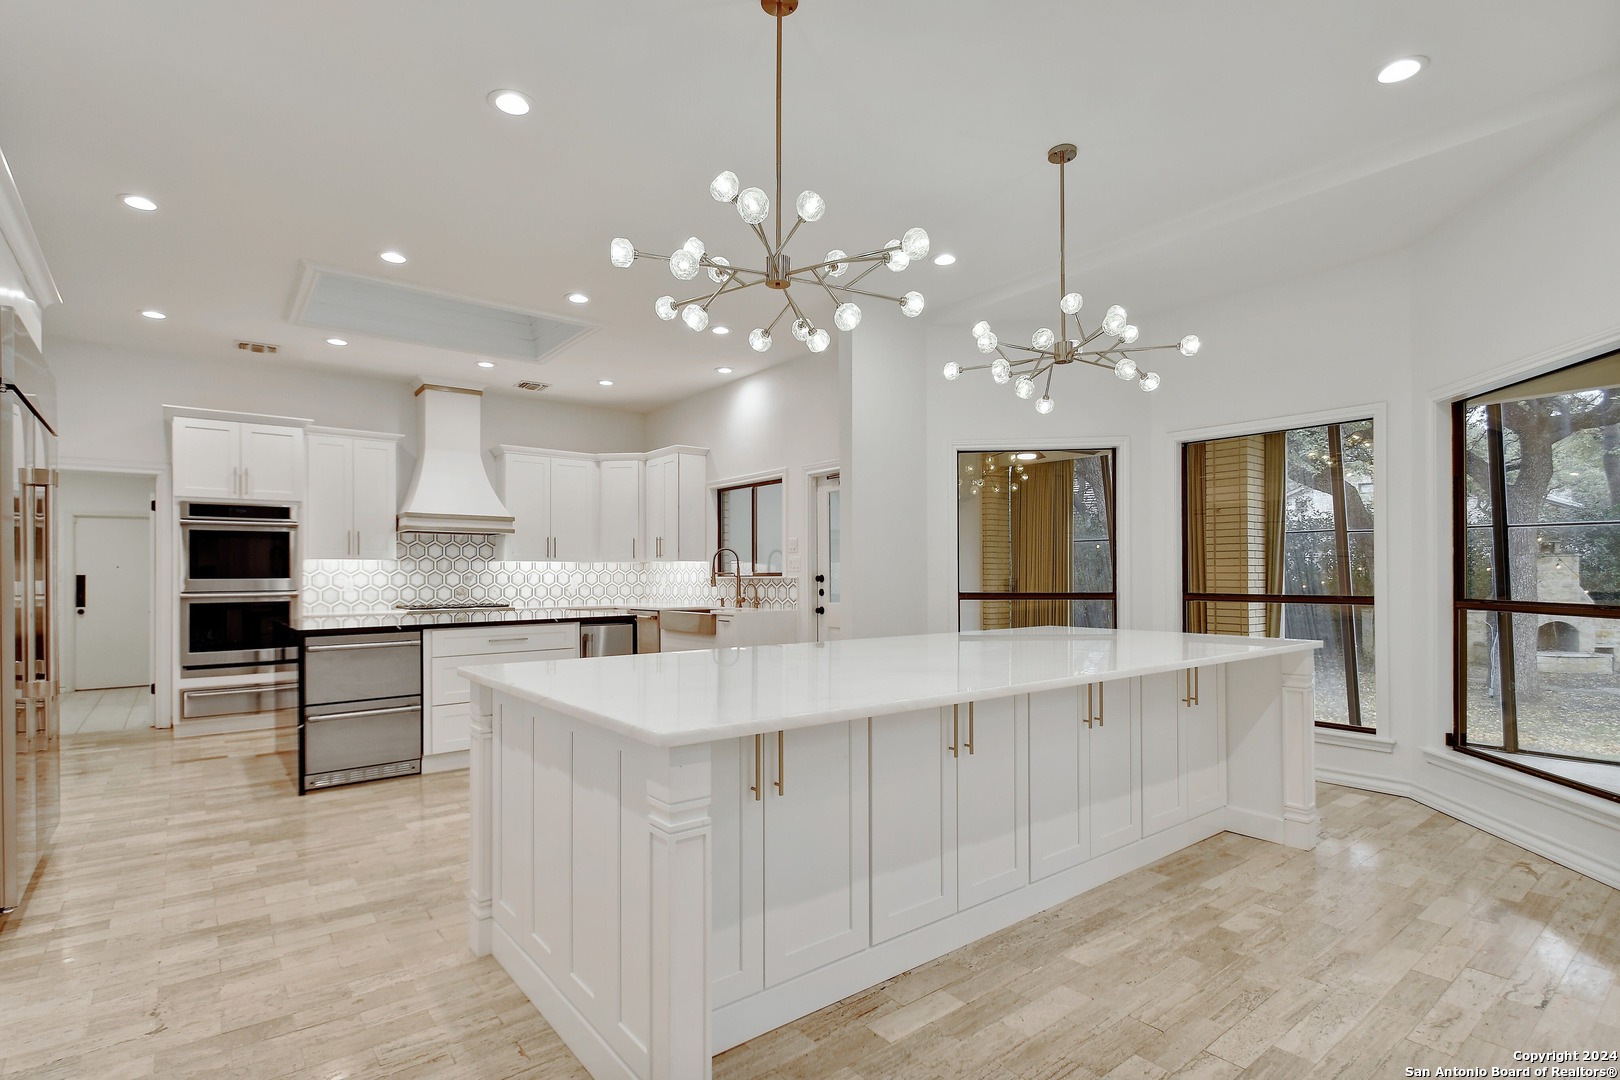 a large white kitchen with kitchen island a chandelier and living room view